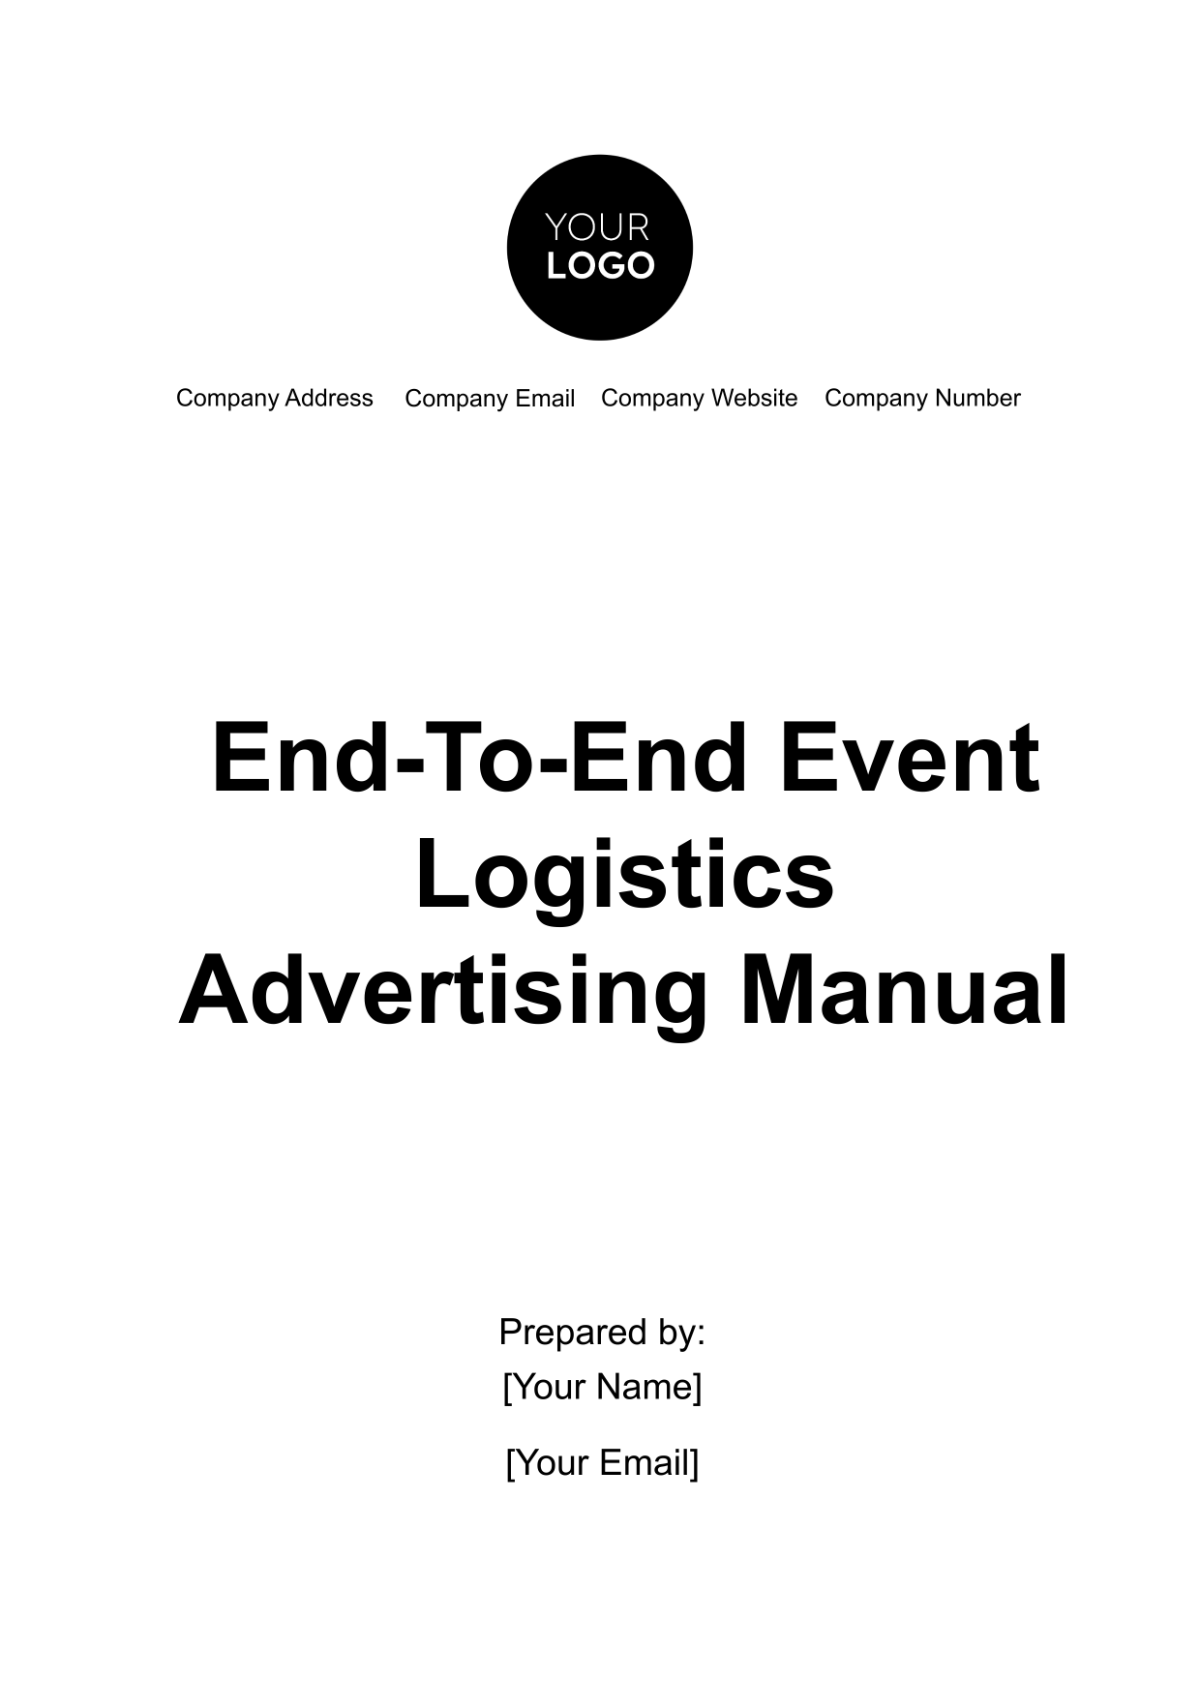 Free End-to-End Event Logistics Advertising Manual Template